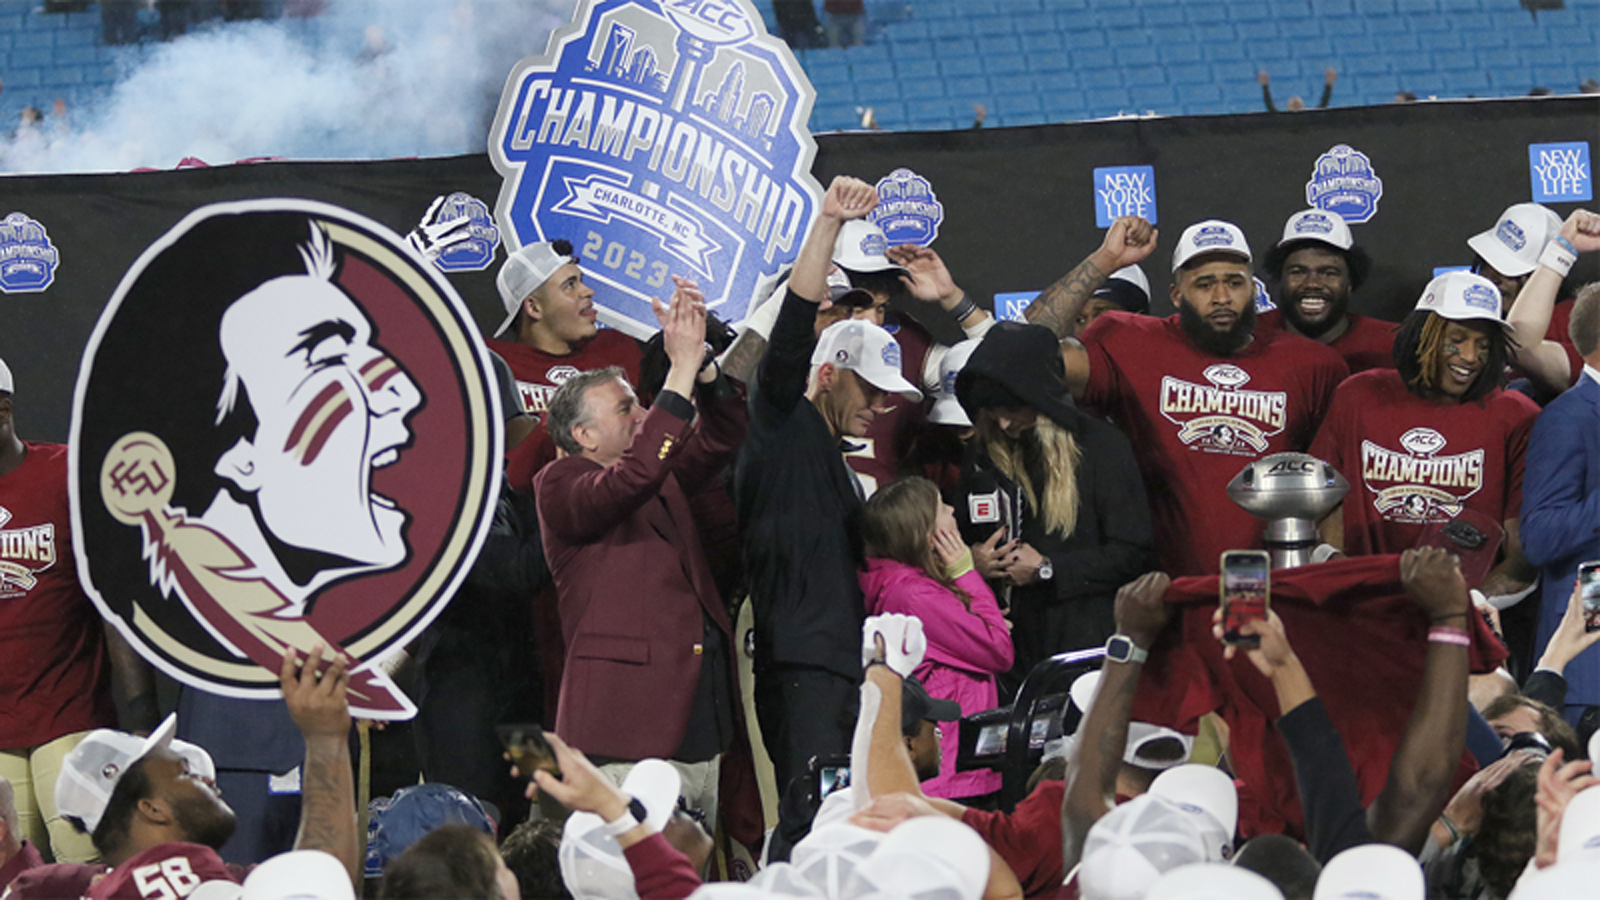 Florida State AD rips CFP officials after being left out: 'The